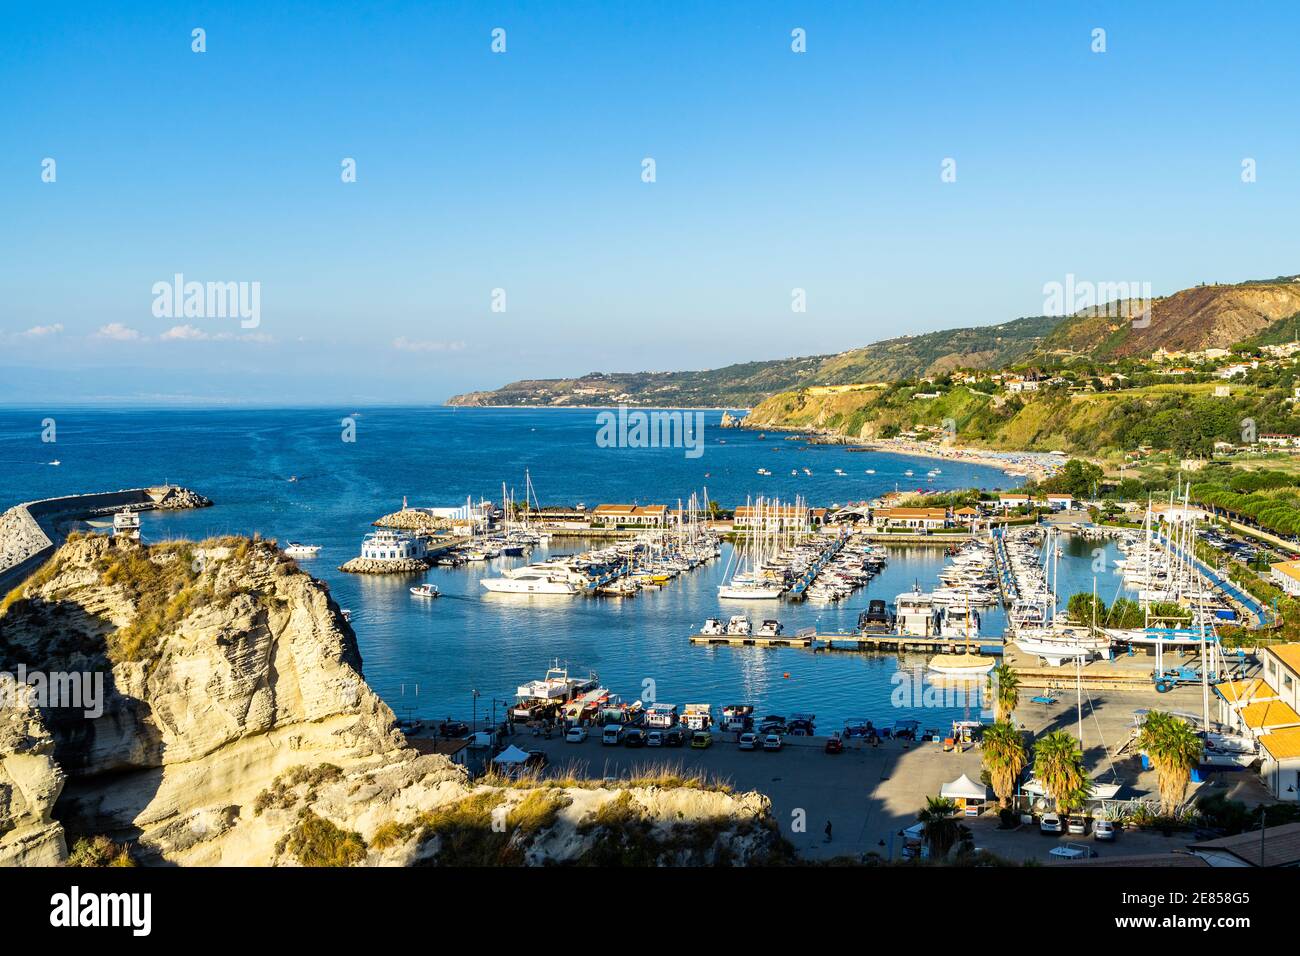 The port of Tropea during summer. Tropea is the most famous seaside resort town of Calabria region, southern Italy Stock Photo